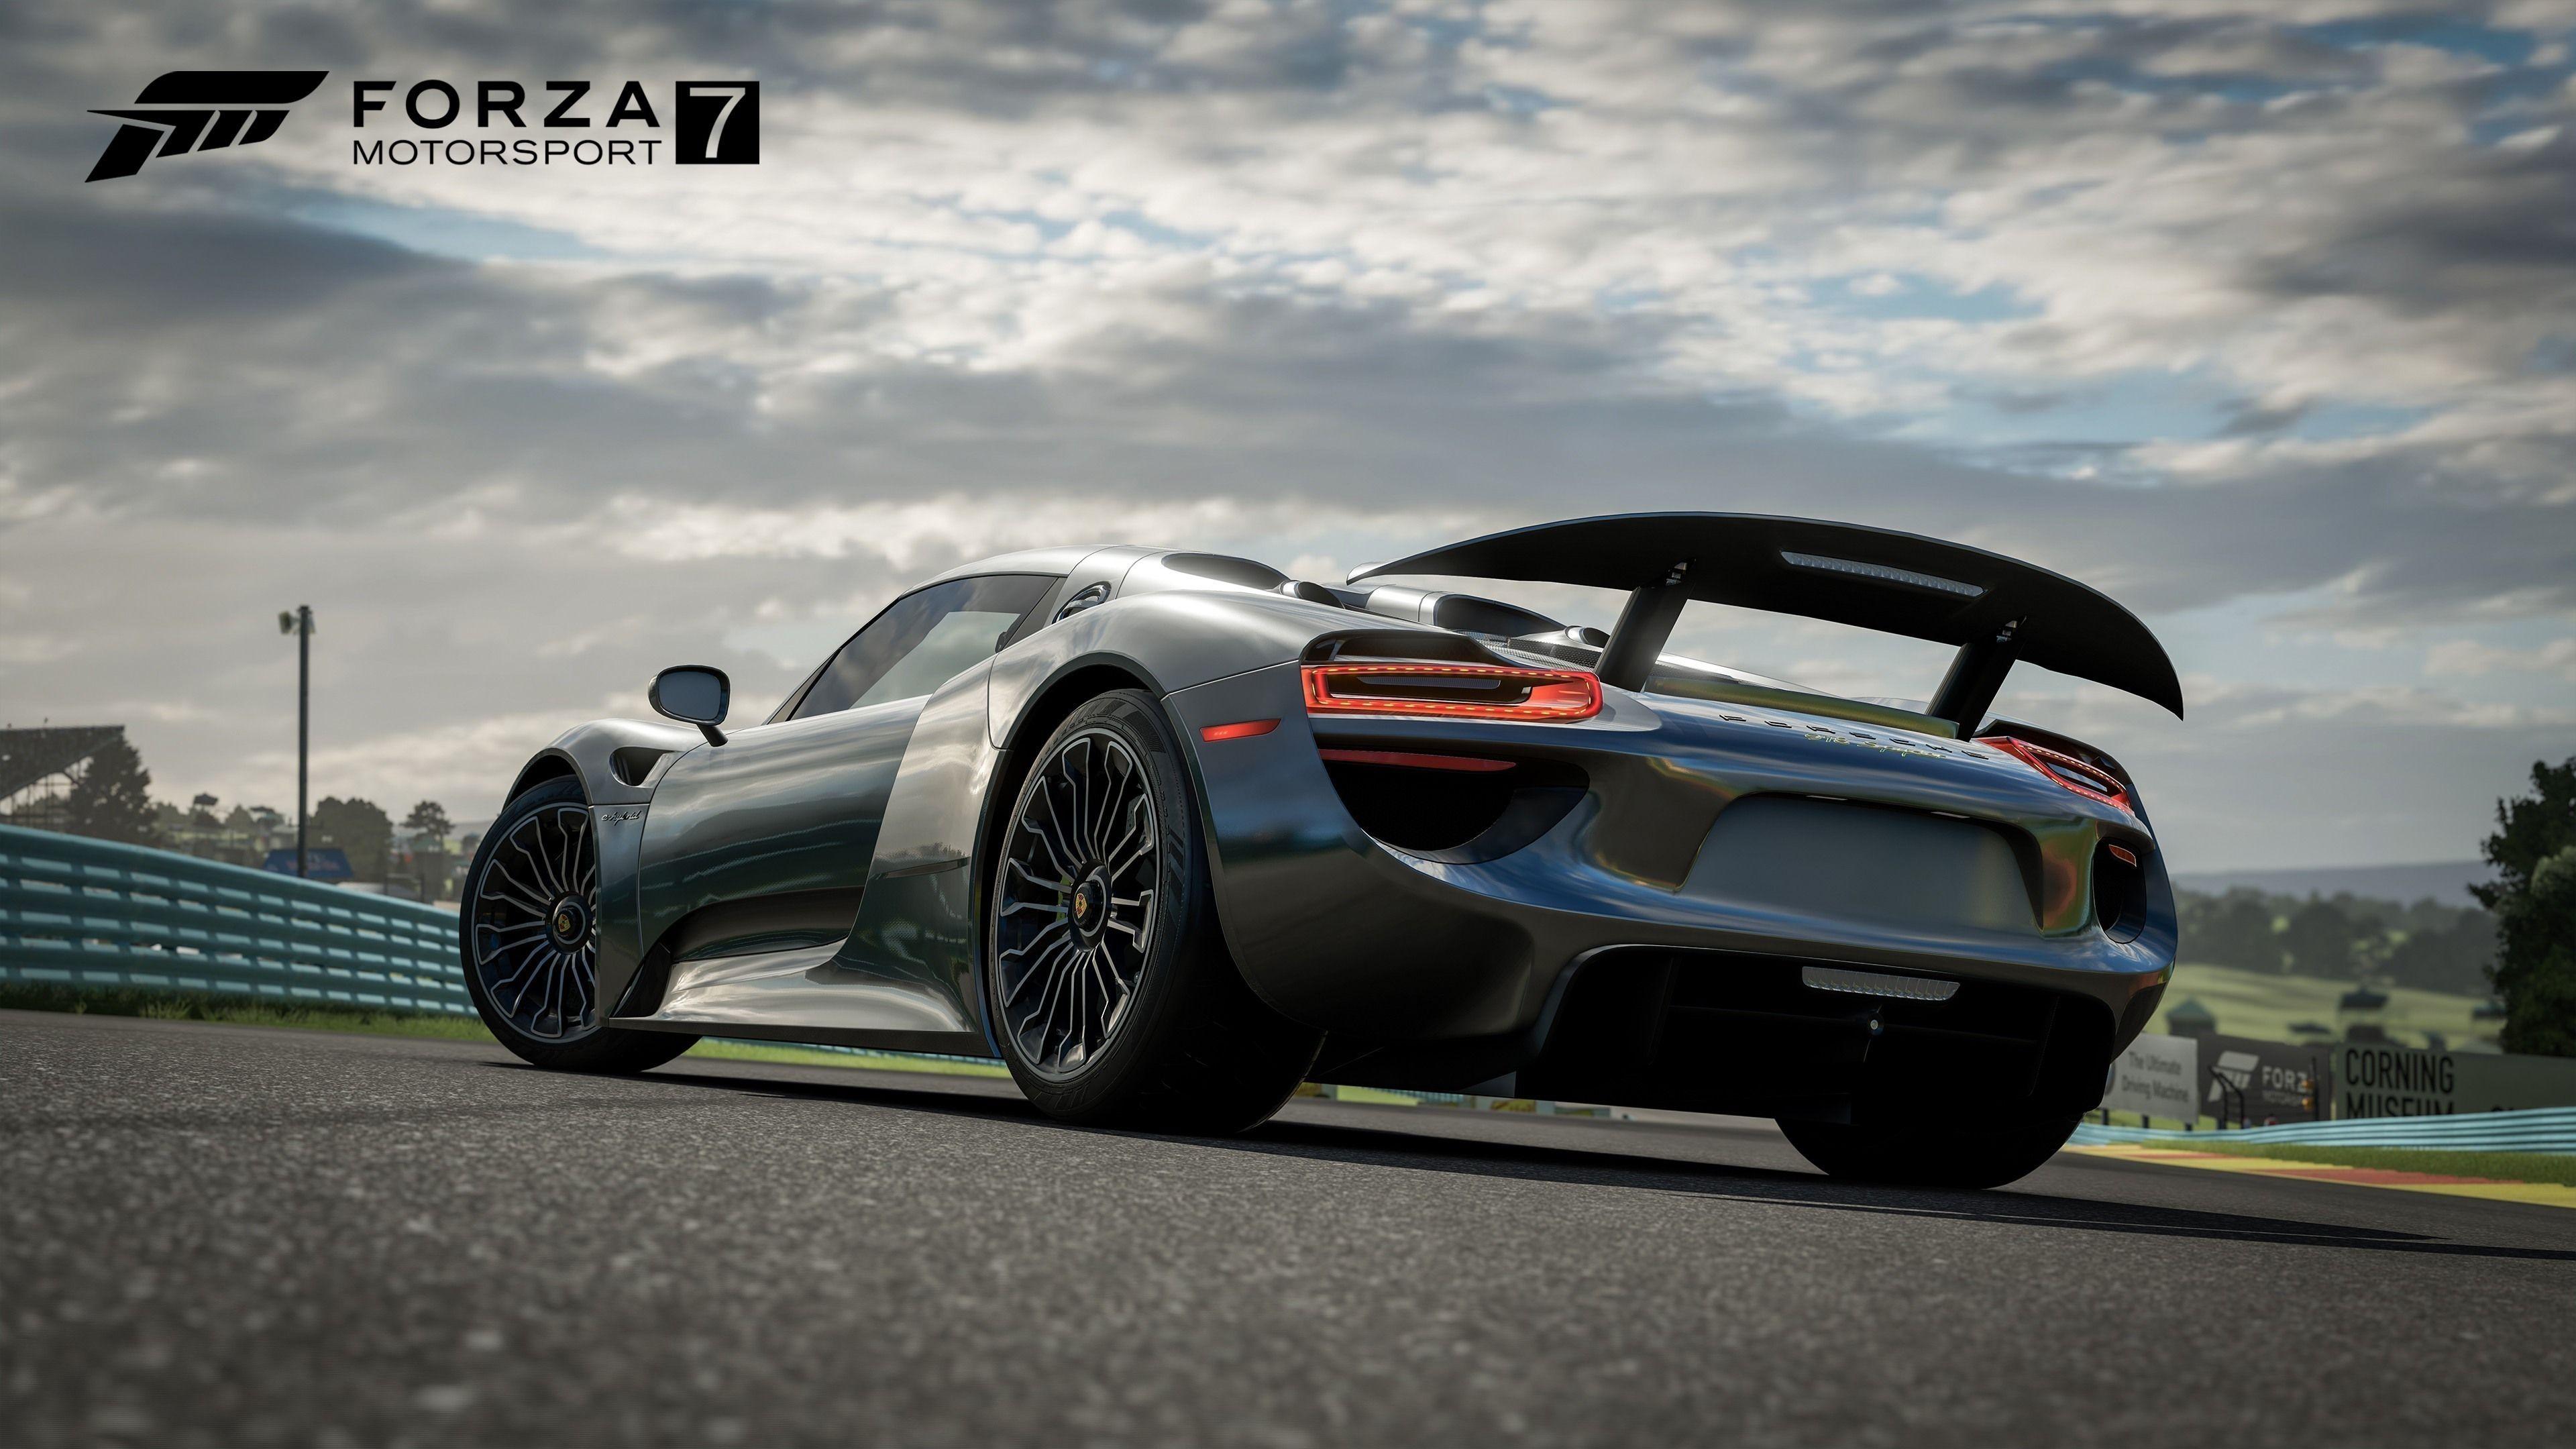 Forza Motorsport 7 Wallpapers Top Free Forza Motorsport 7 Backgrounds Wallpaperaccess